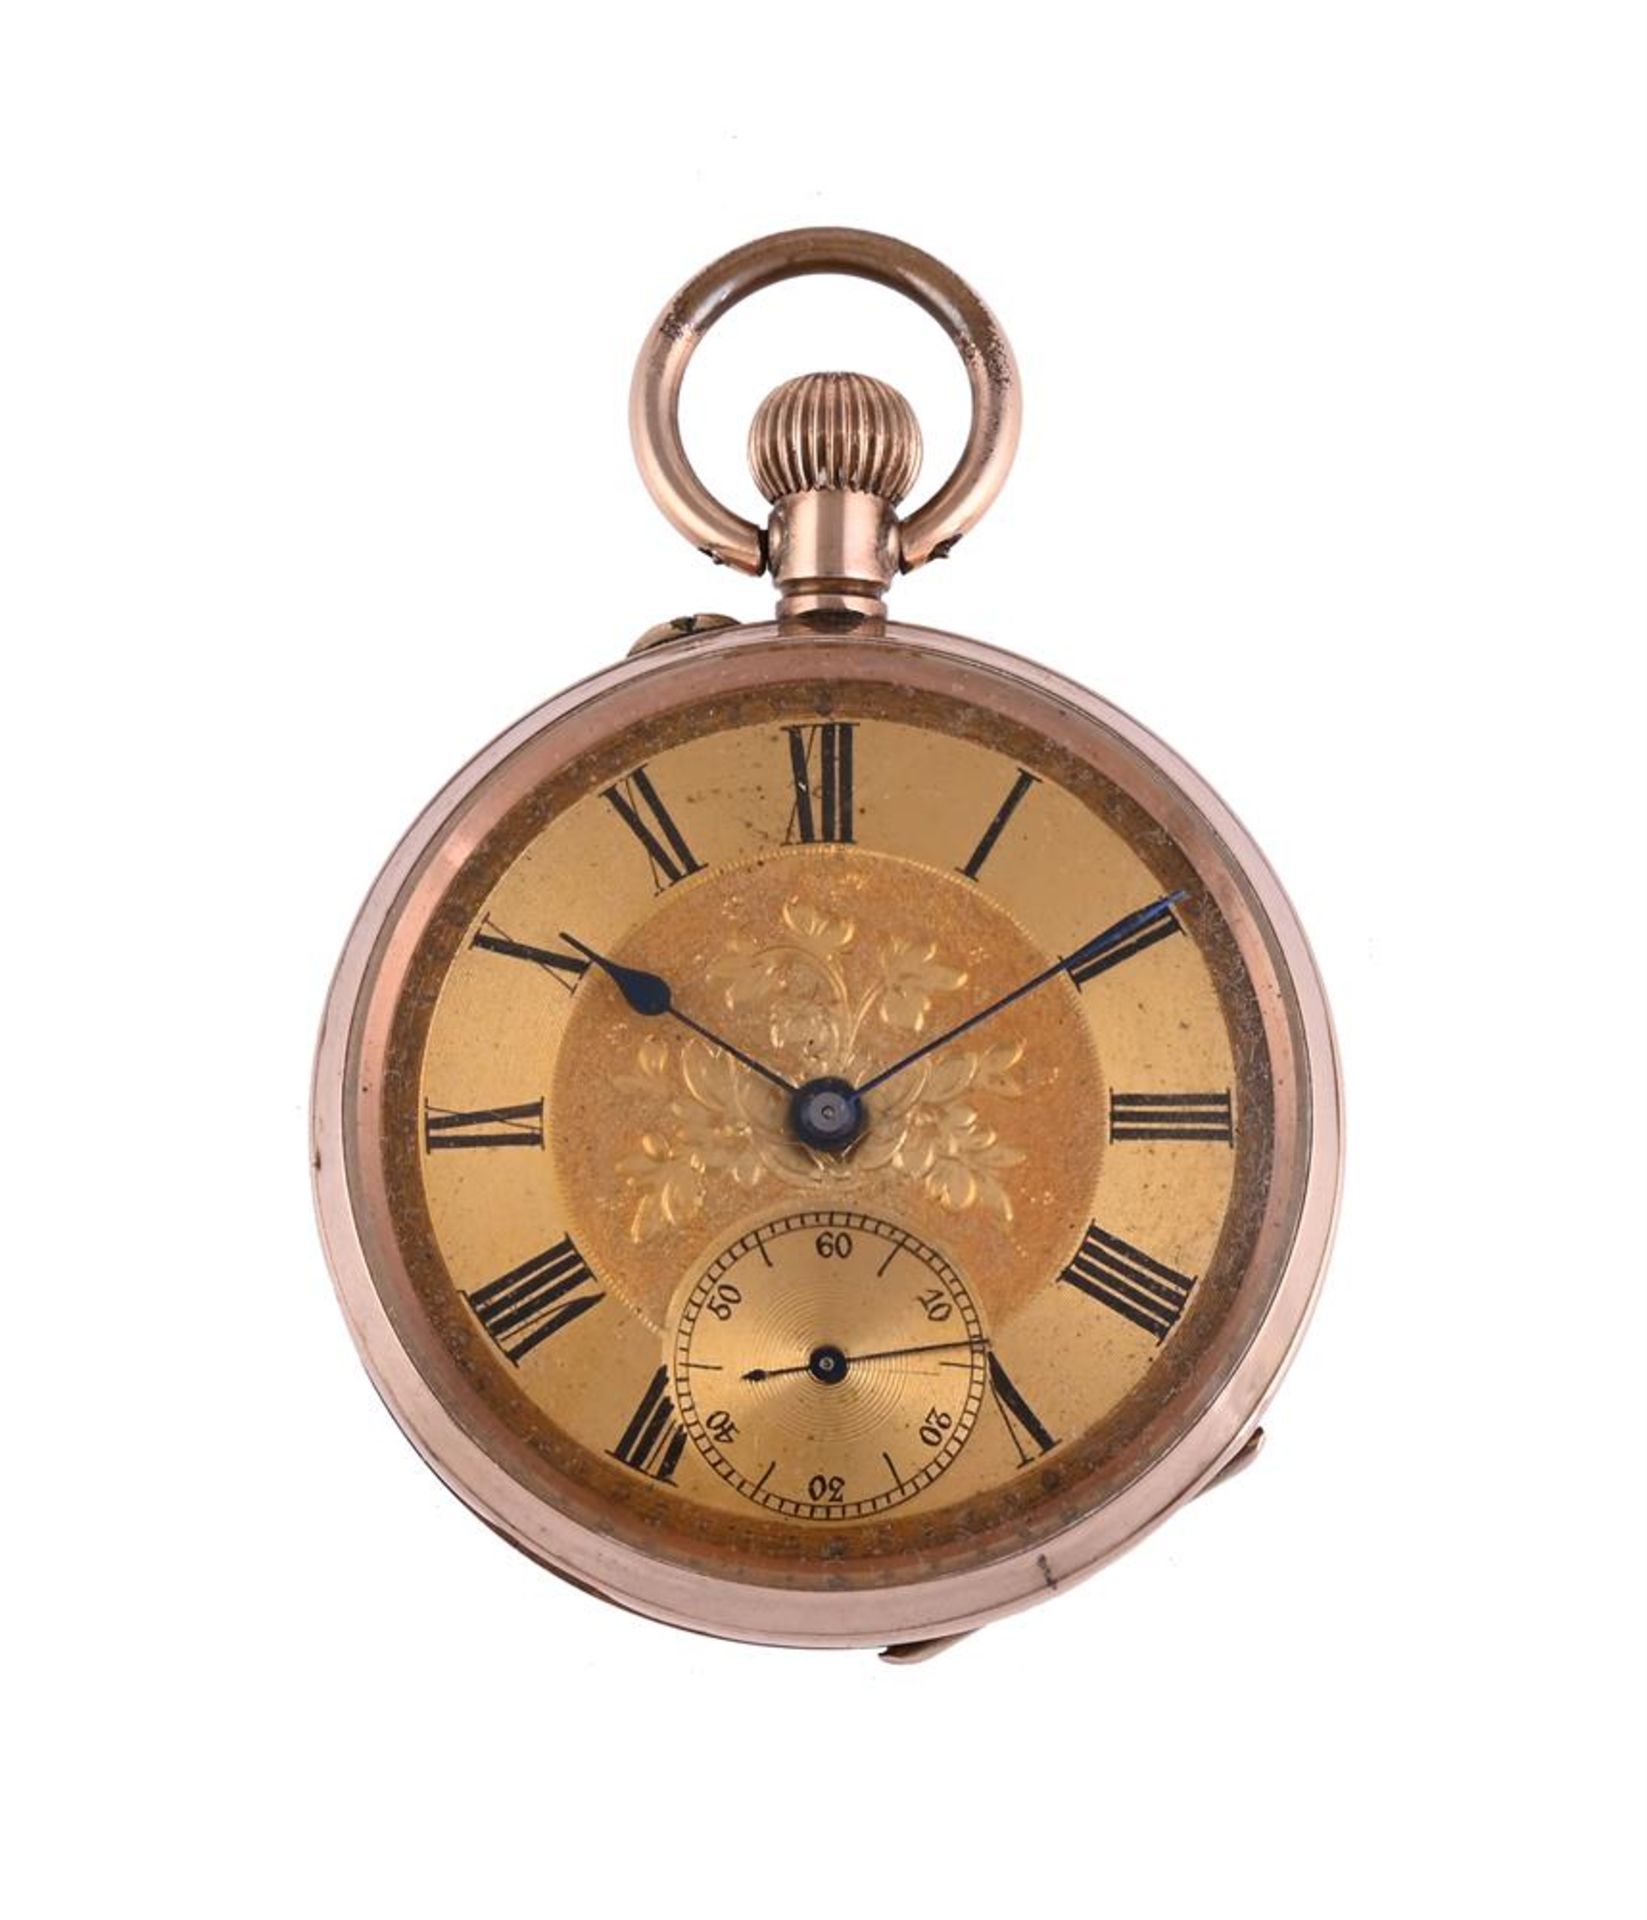 UNSIGNED, A GOLD COLOURED KEYLESS WIND OPEN FACE POCKET WATCH - Image 3 of 4